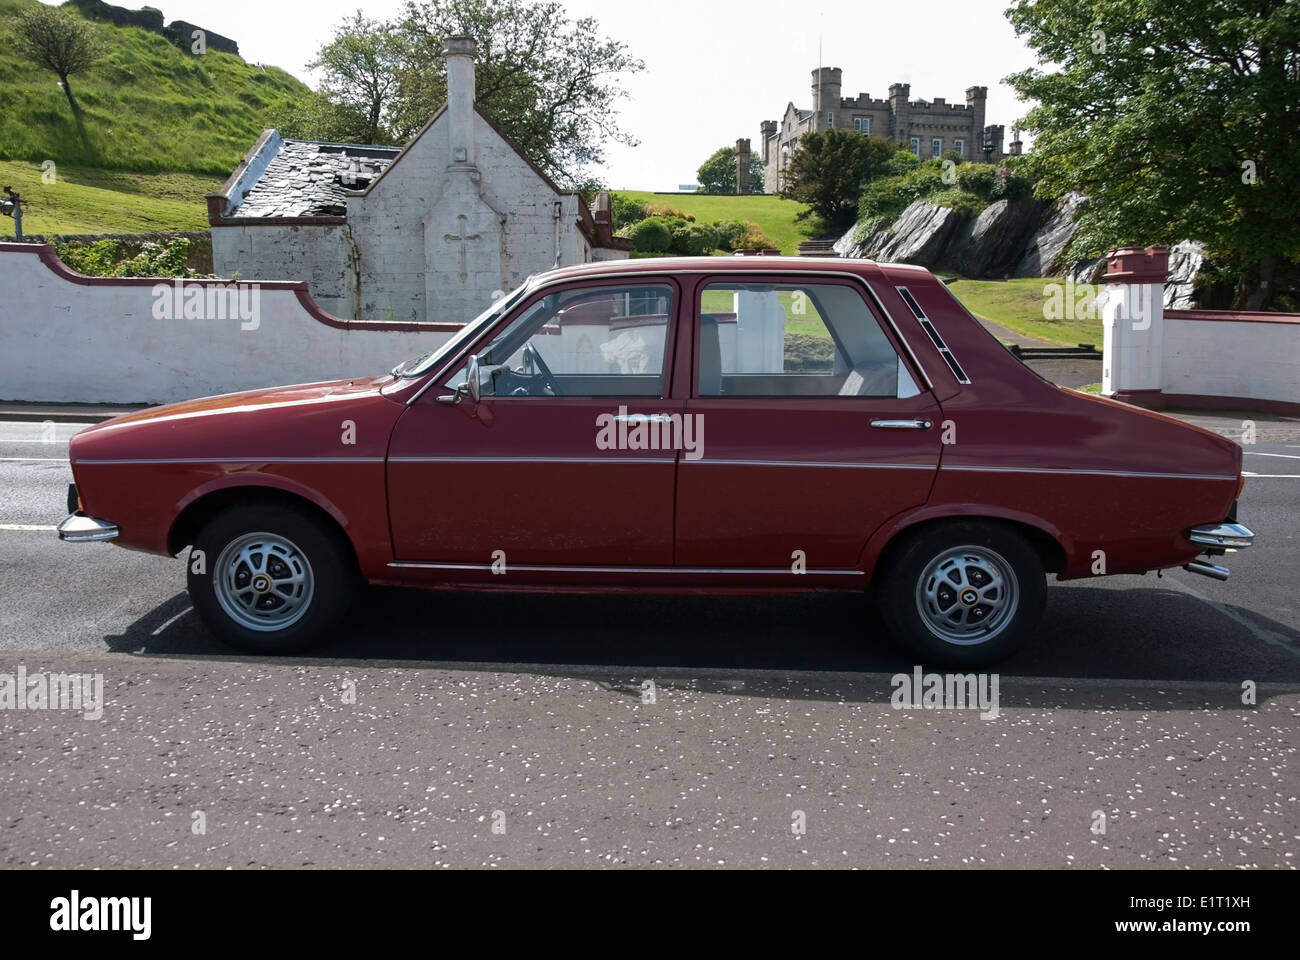 1972 Red Renault 12TL French Motor Car Stock Photo